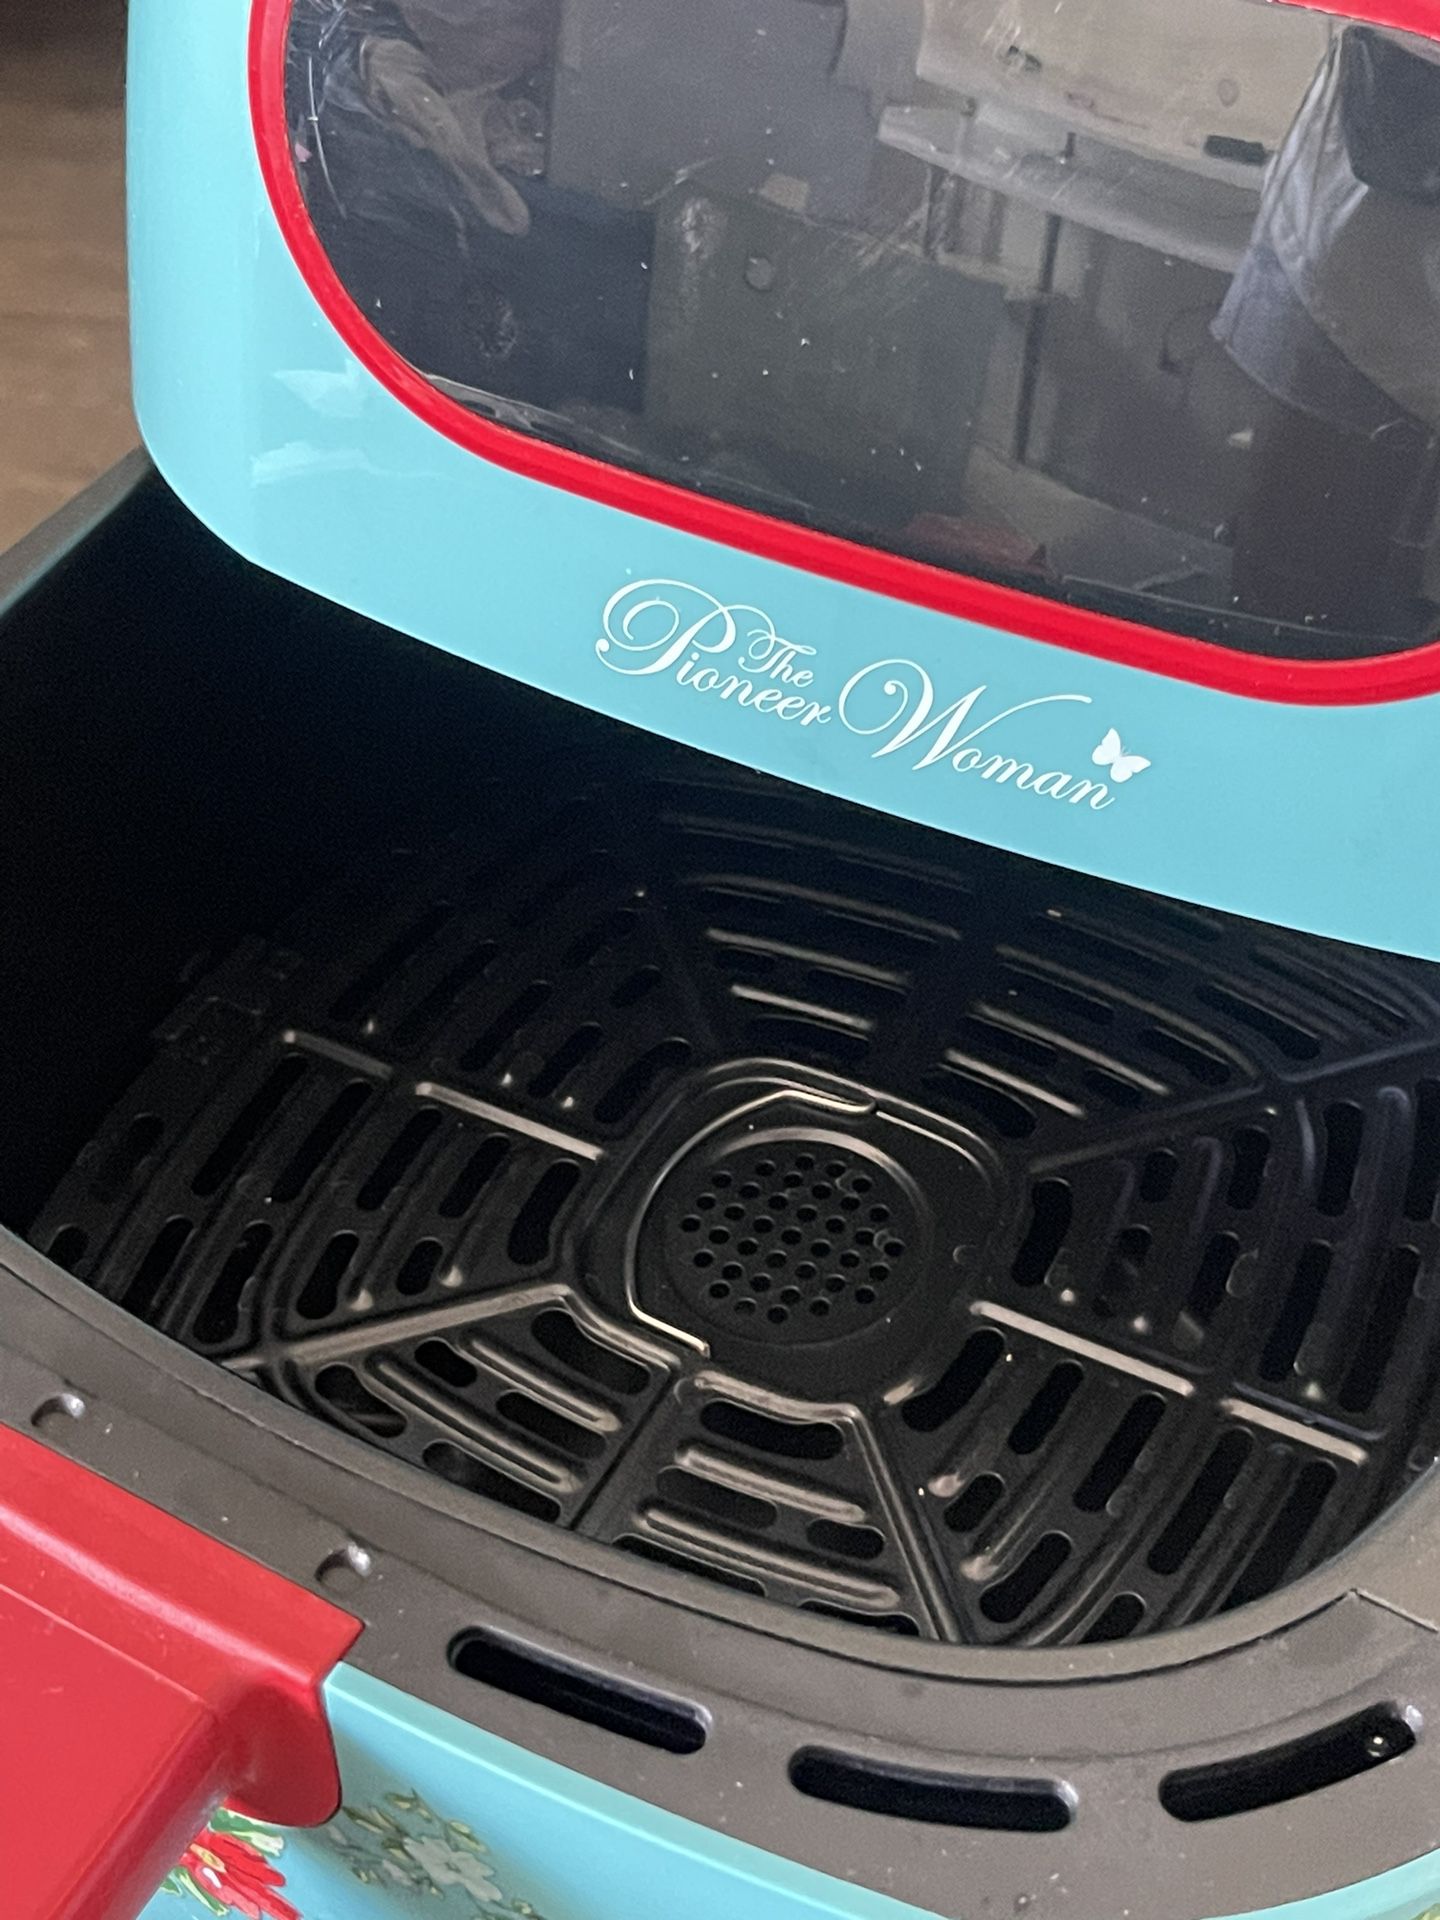 Powerxl Grill Air Fryer Combo for Sale in North Las Vegas, NV - OfferUp